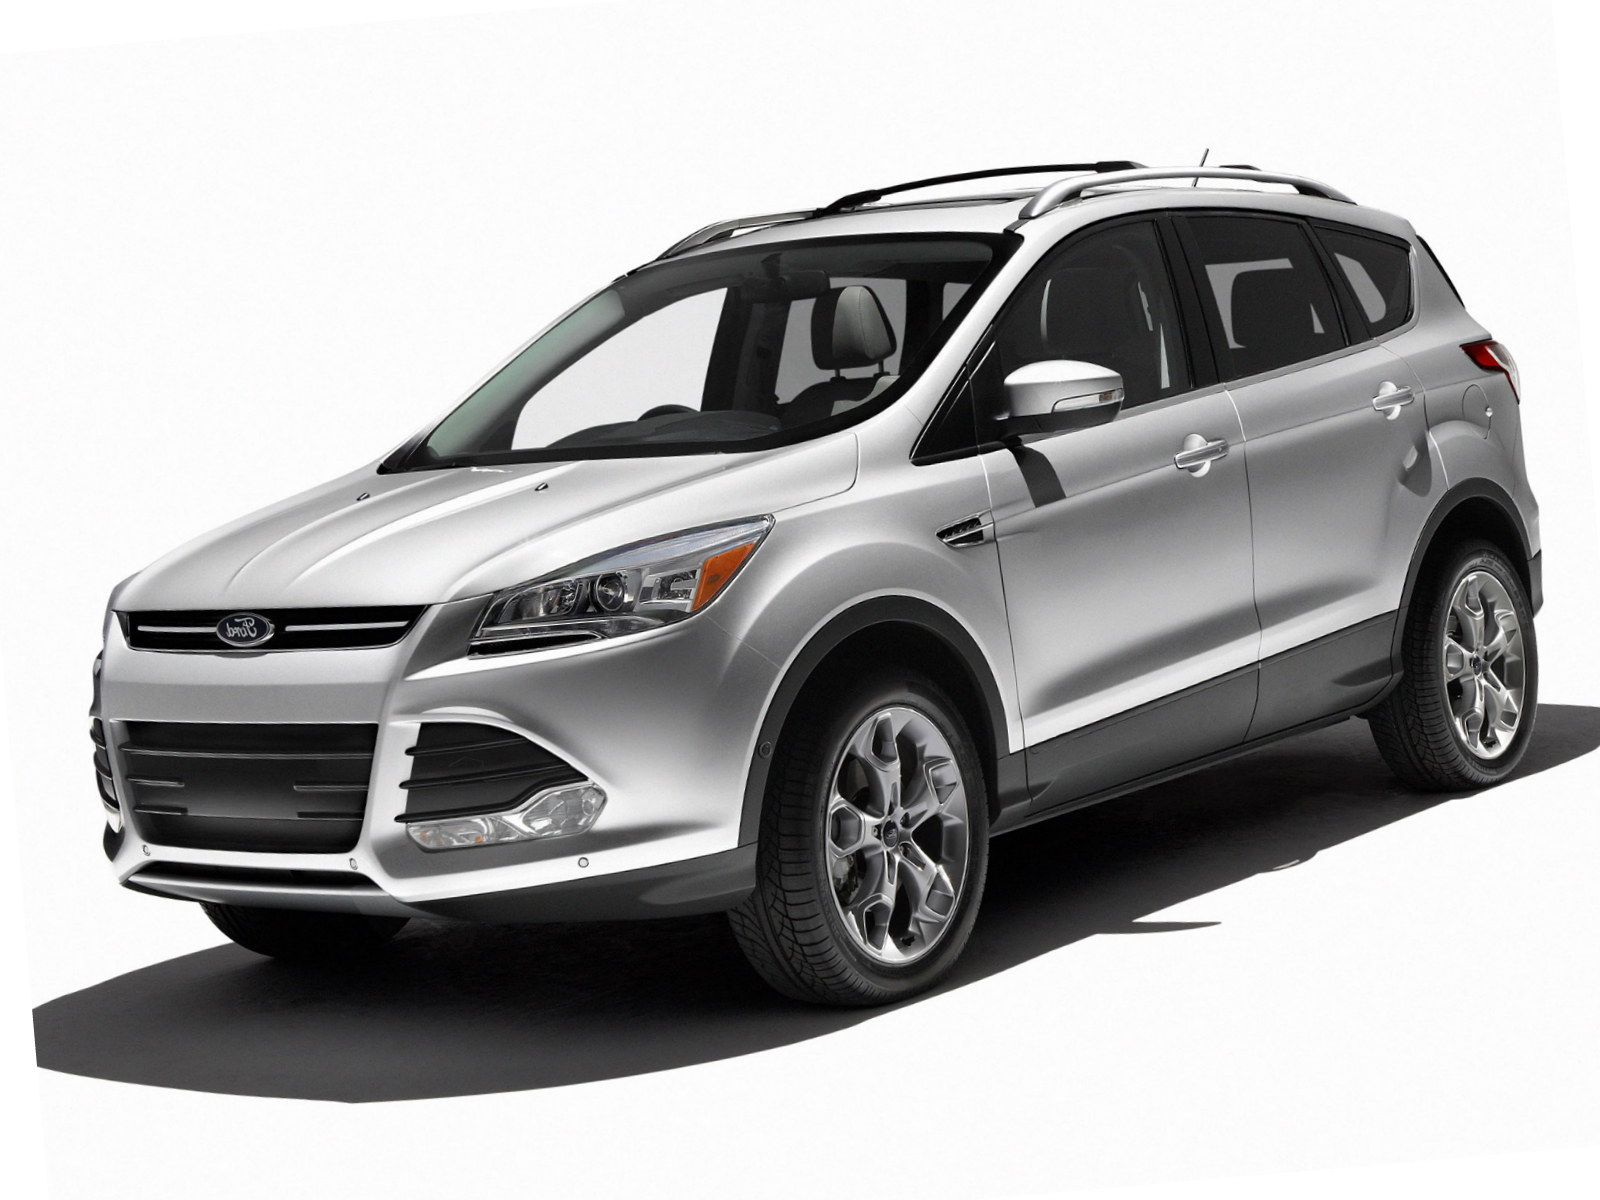 2012 Ford escape safety reviews